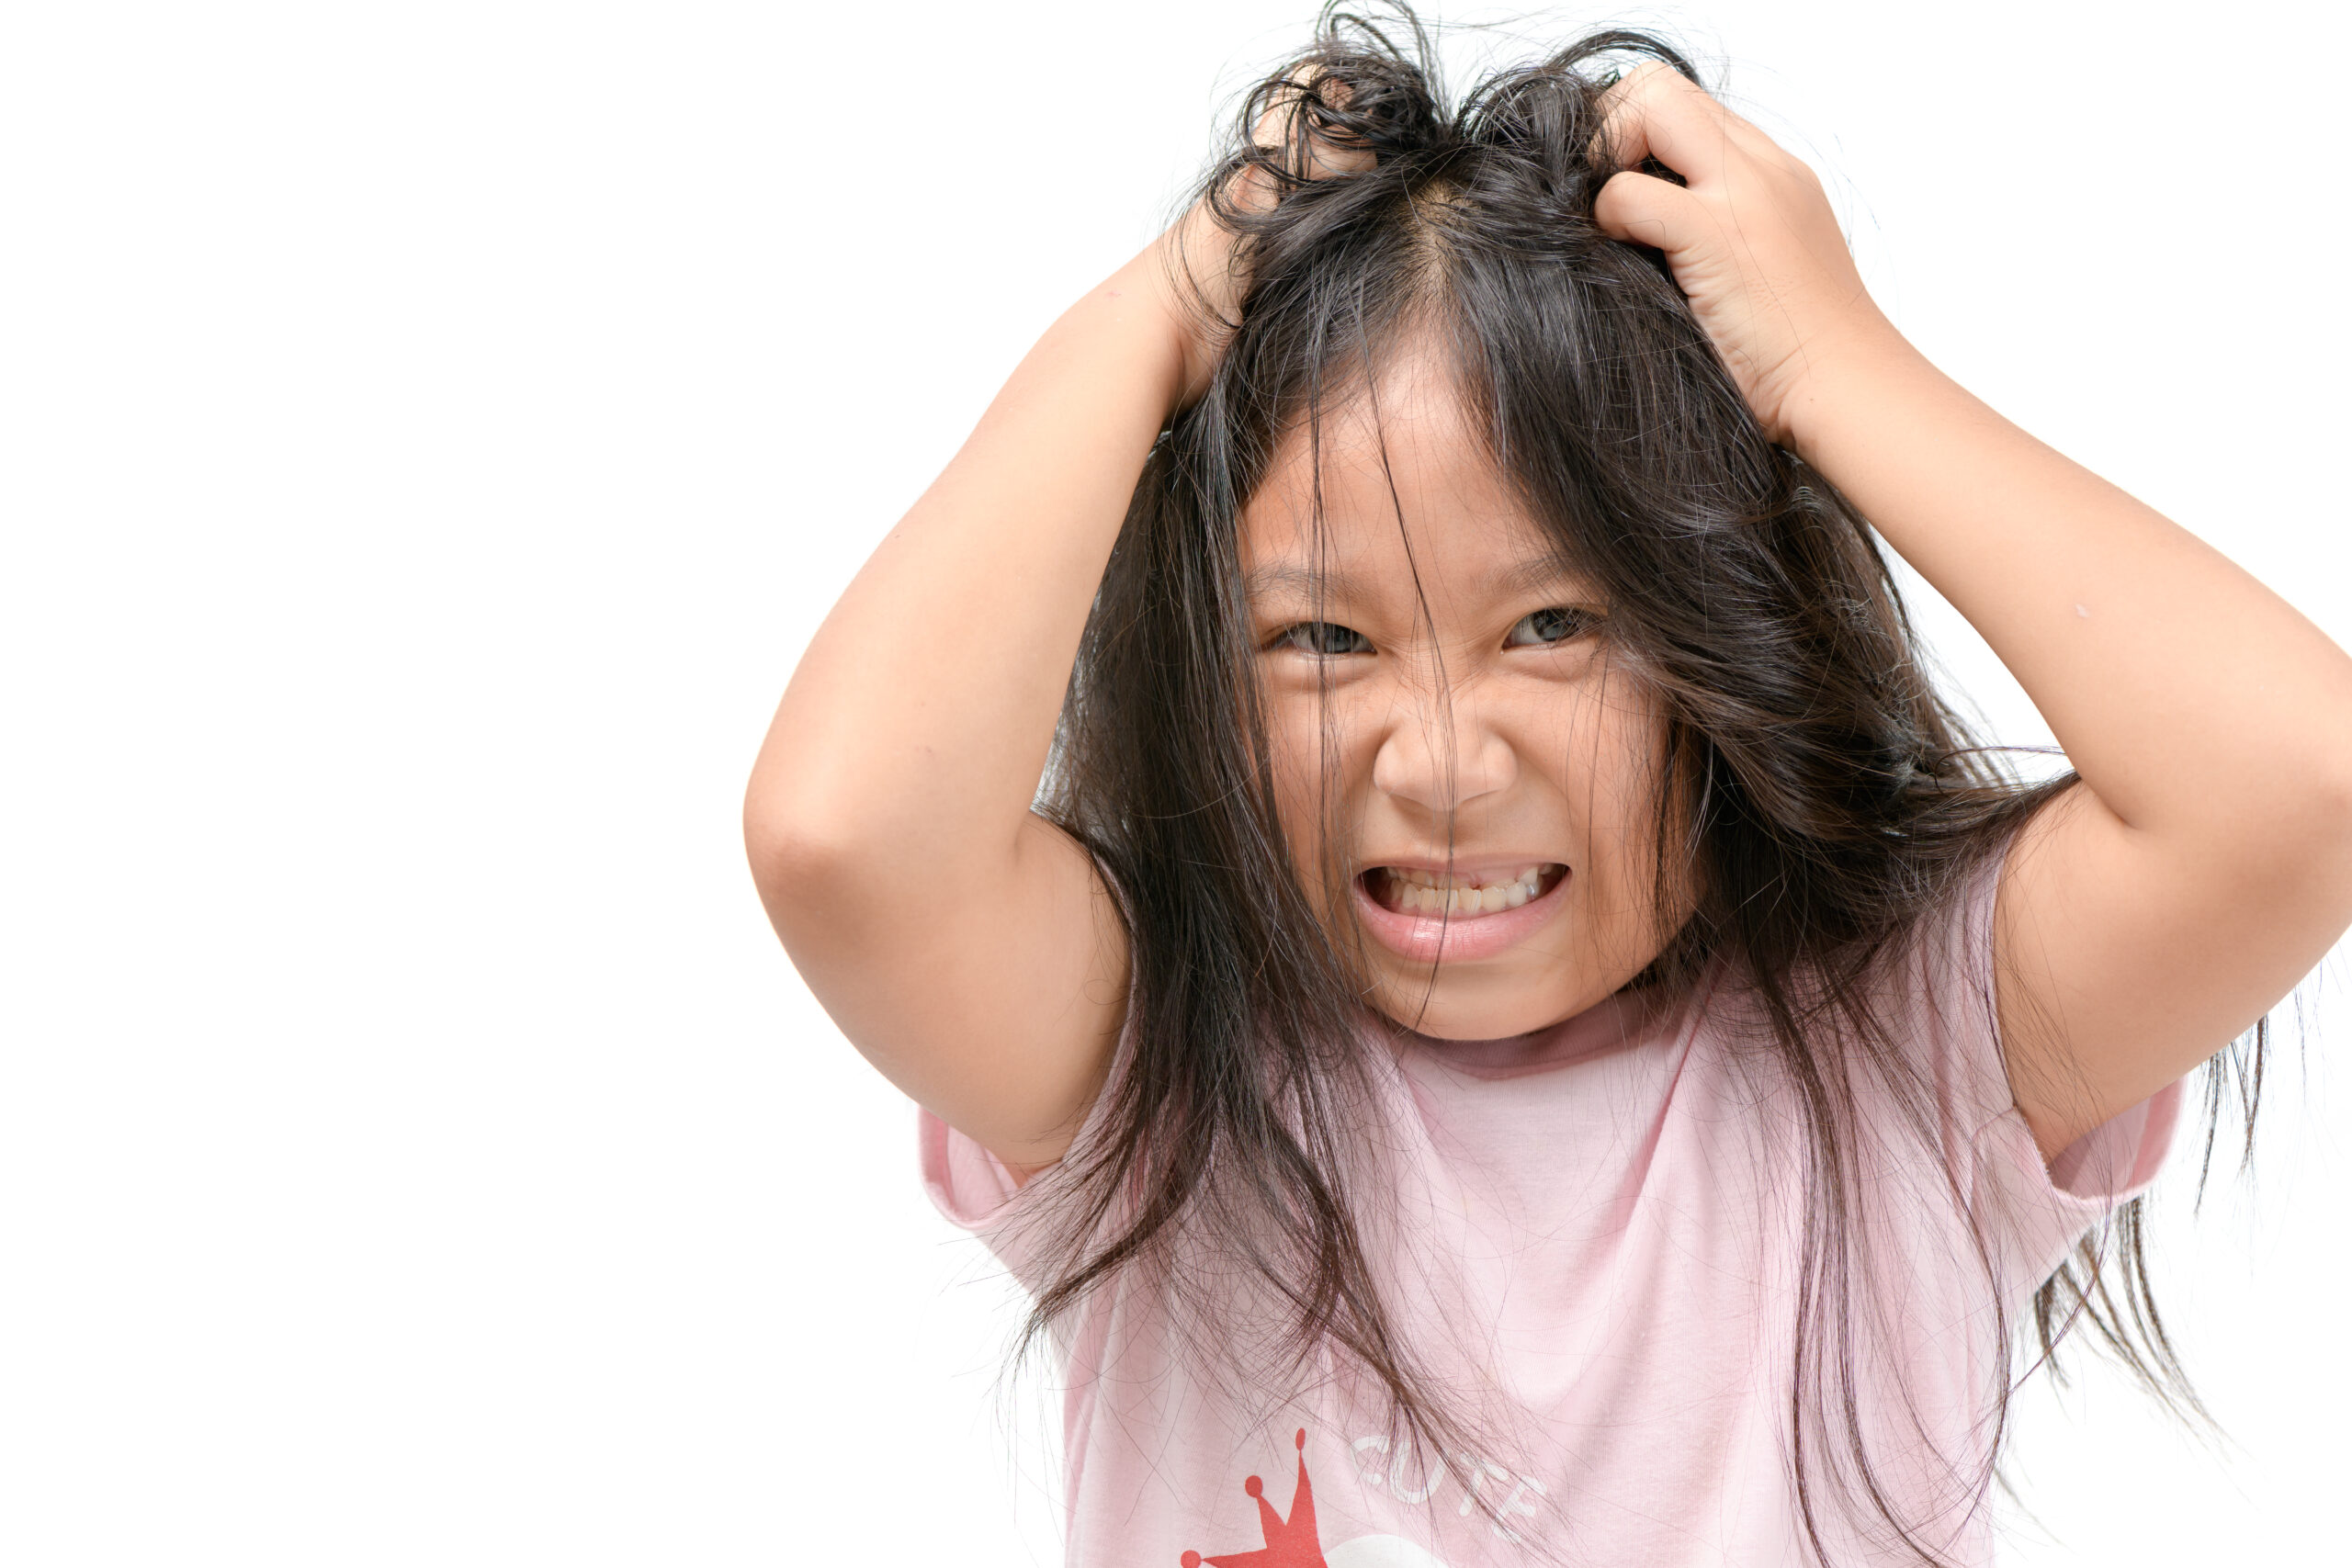 How to get rid of head lice the safe and natural way?